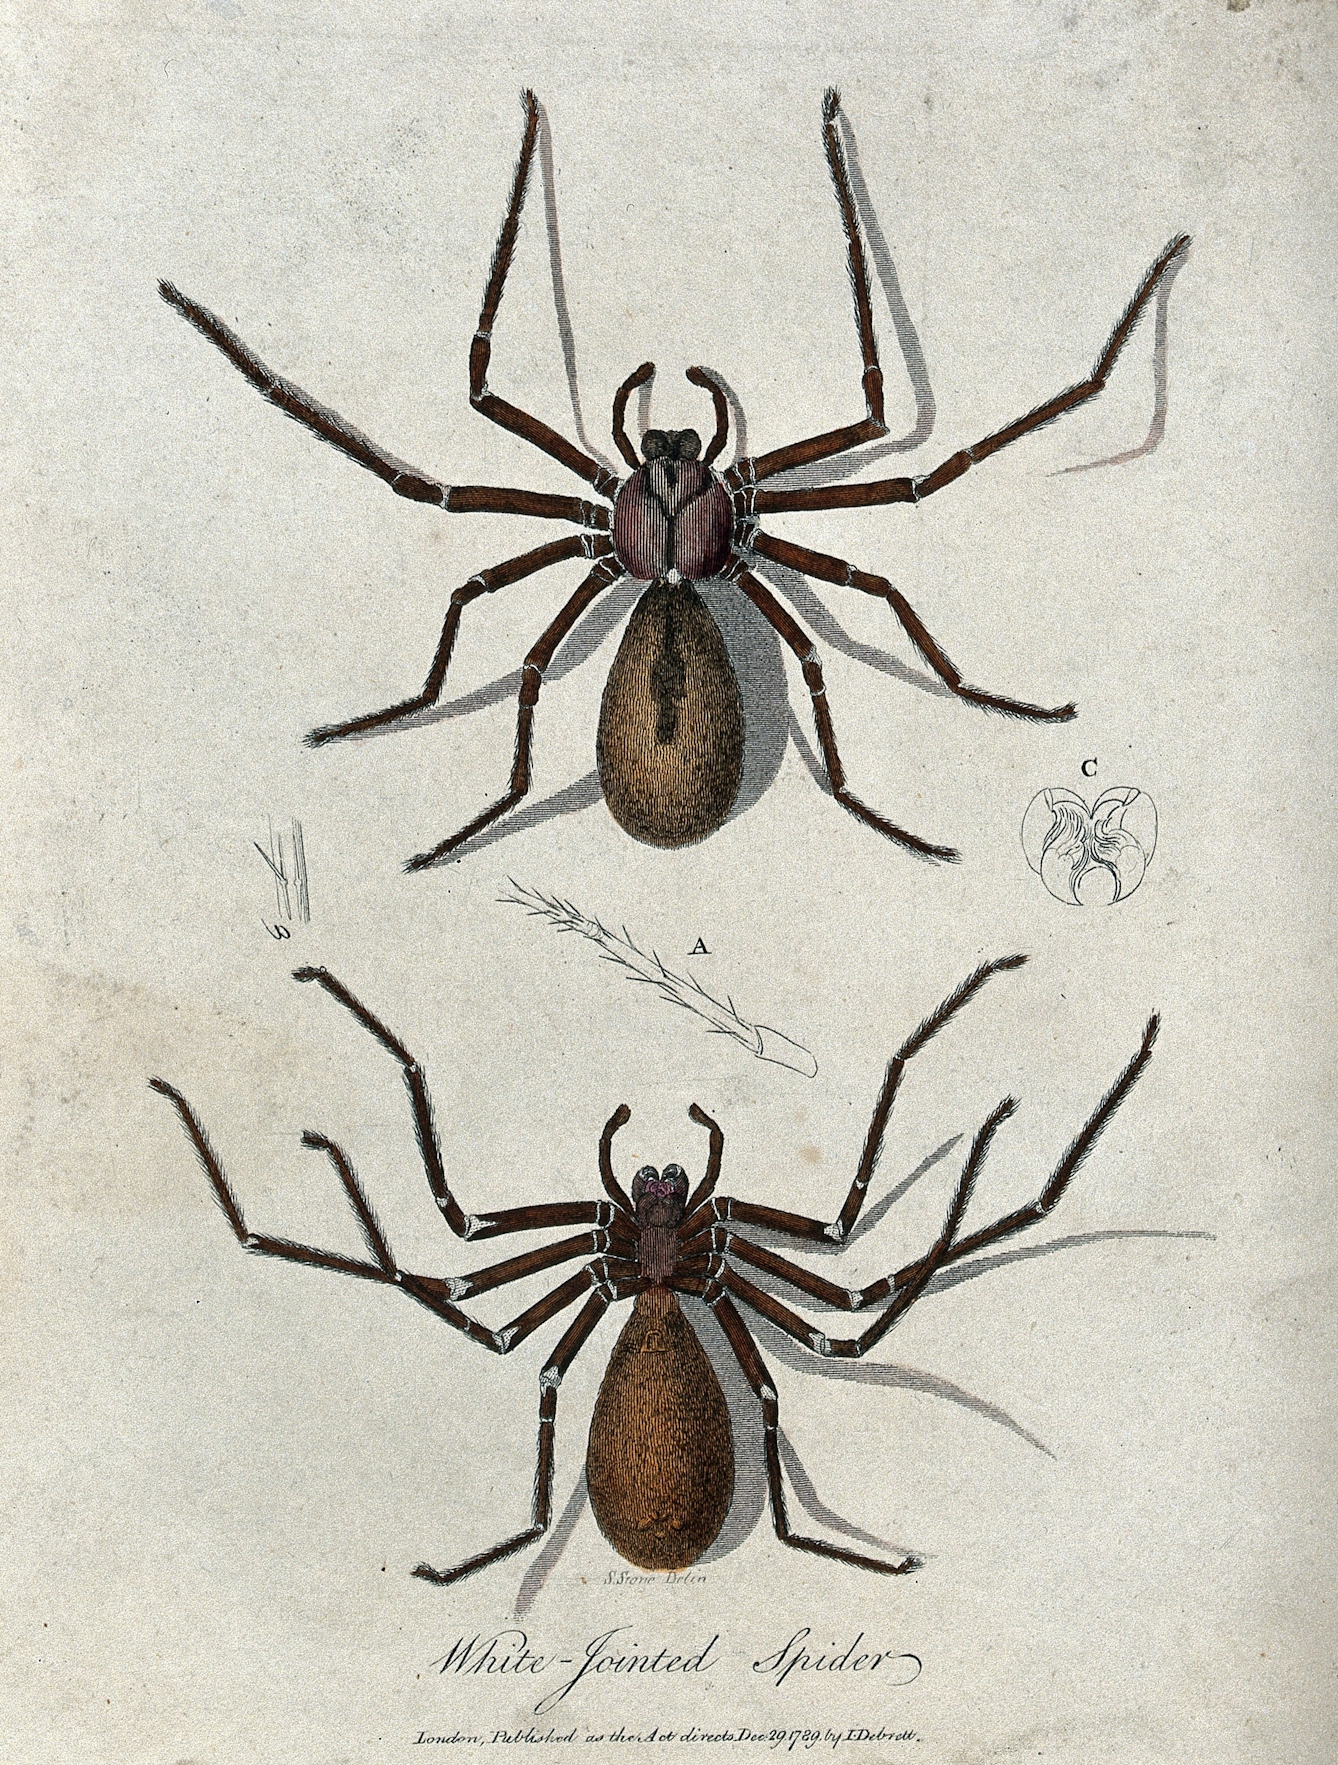 Illustration of a white jointed spider